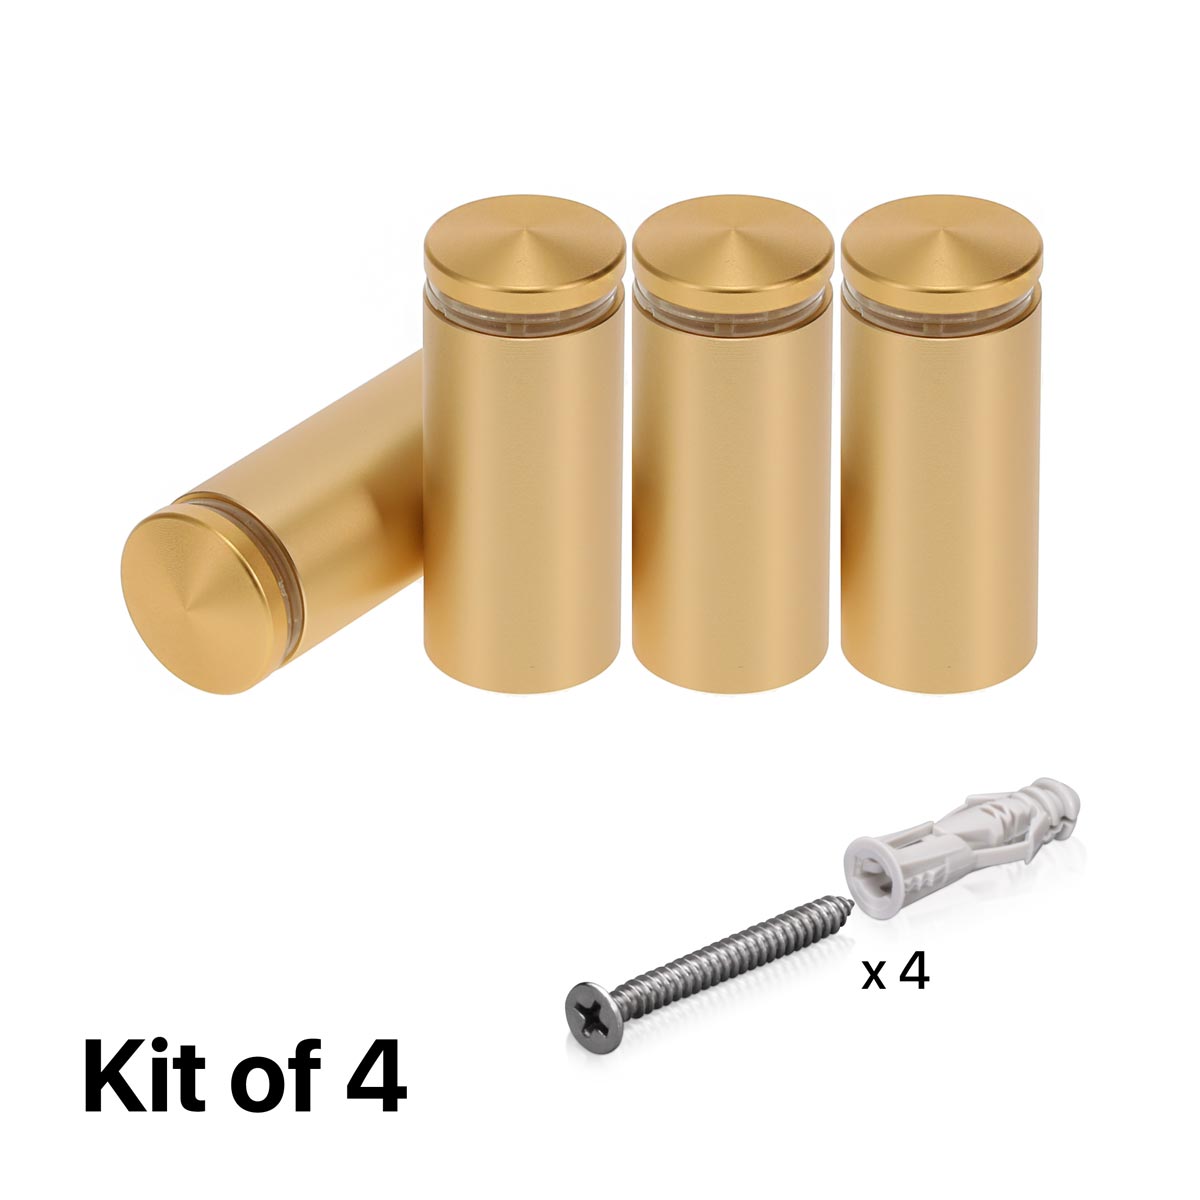 (Set of 4) 7/8'' Diameter X 1-3/4'' Barrel Length, Alumi. Rounded Head Standoffs, Matte Champagne Anodized Finish Standoff with (4) 2216Z Screws and (4) LANC1 Anchors for concrete or drywall (For In / Out use) [Required Material Hole Size: 7/16'']